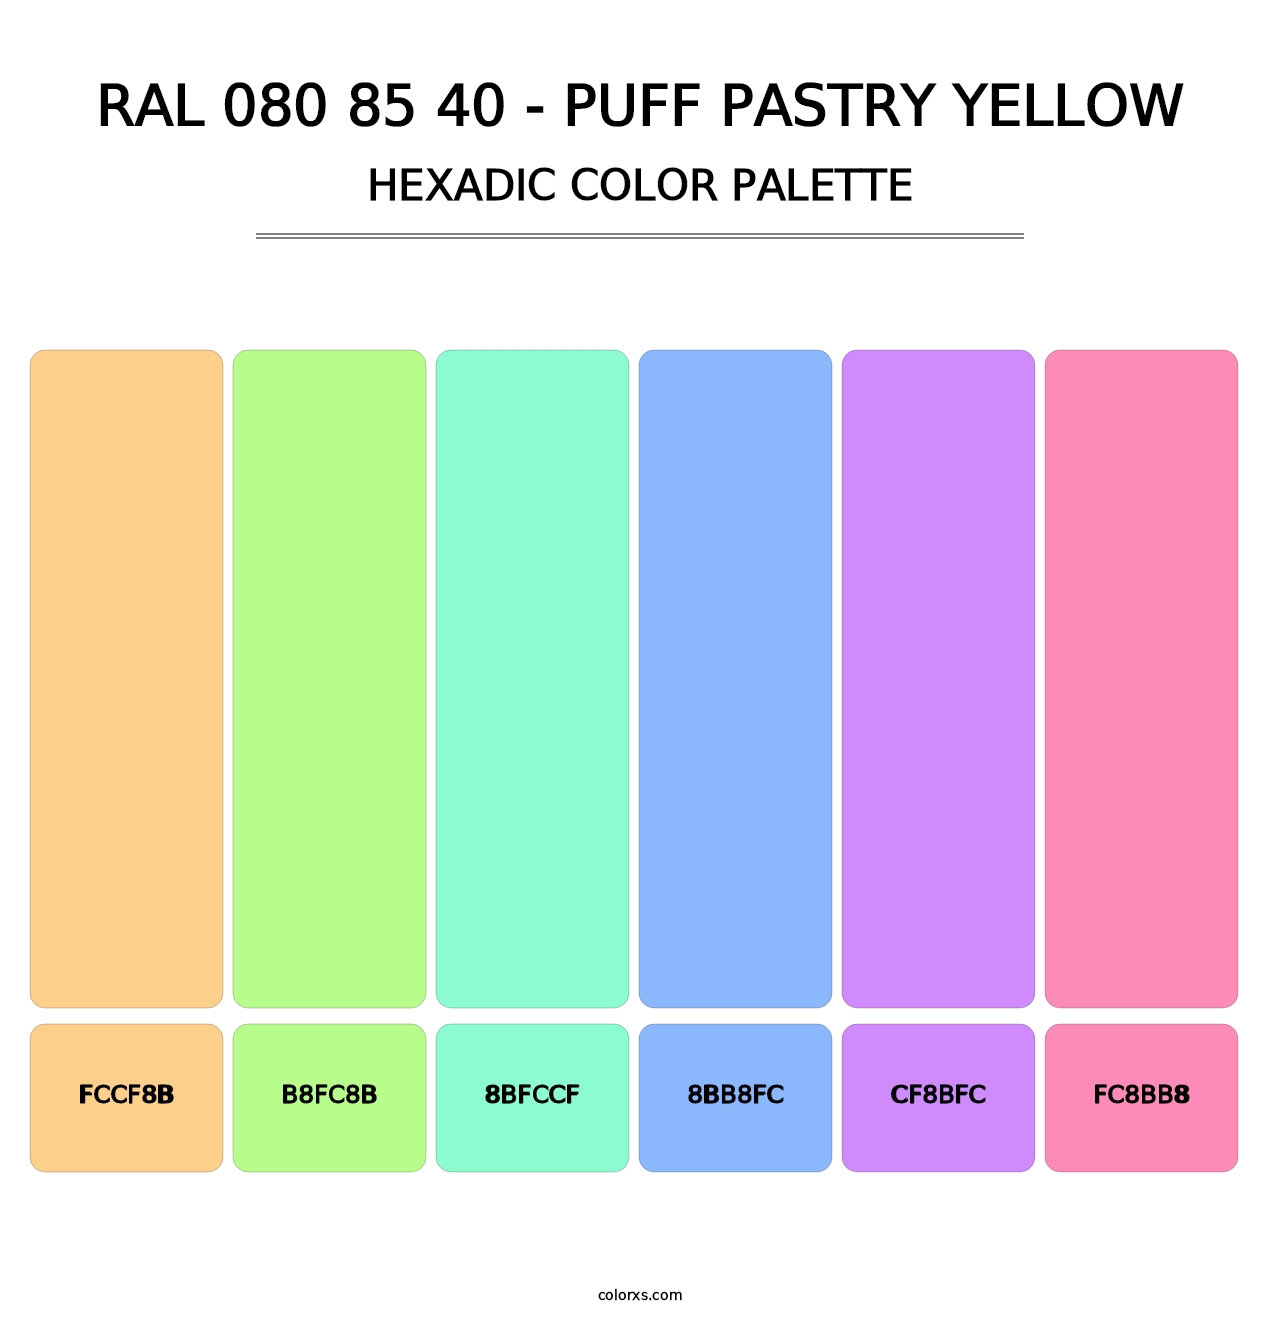 RAL 080 85 40 - Puff Pastry Yellow - Hexadic Color Palette